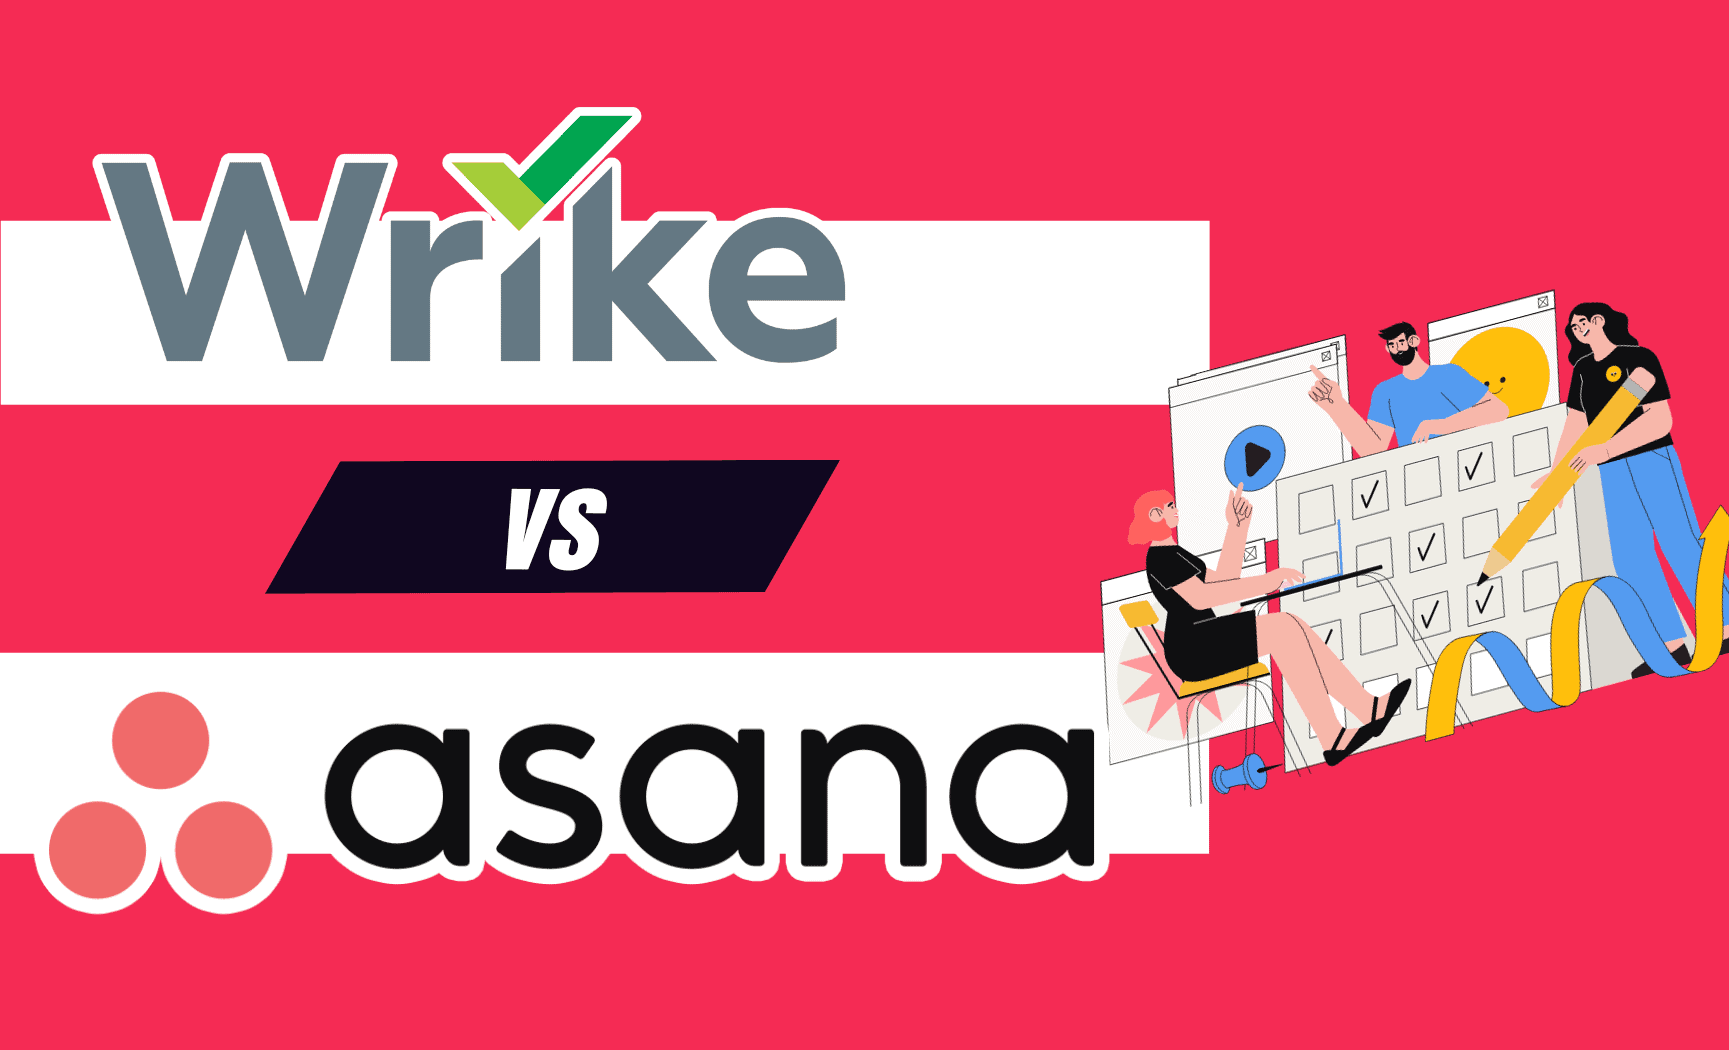 Wrike Vs Asana: Which Project Management Software is Better?